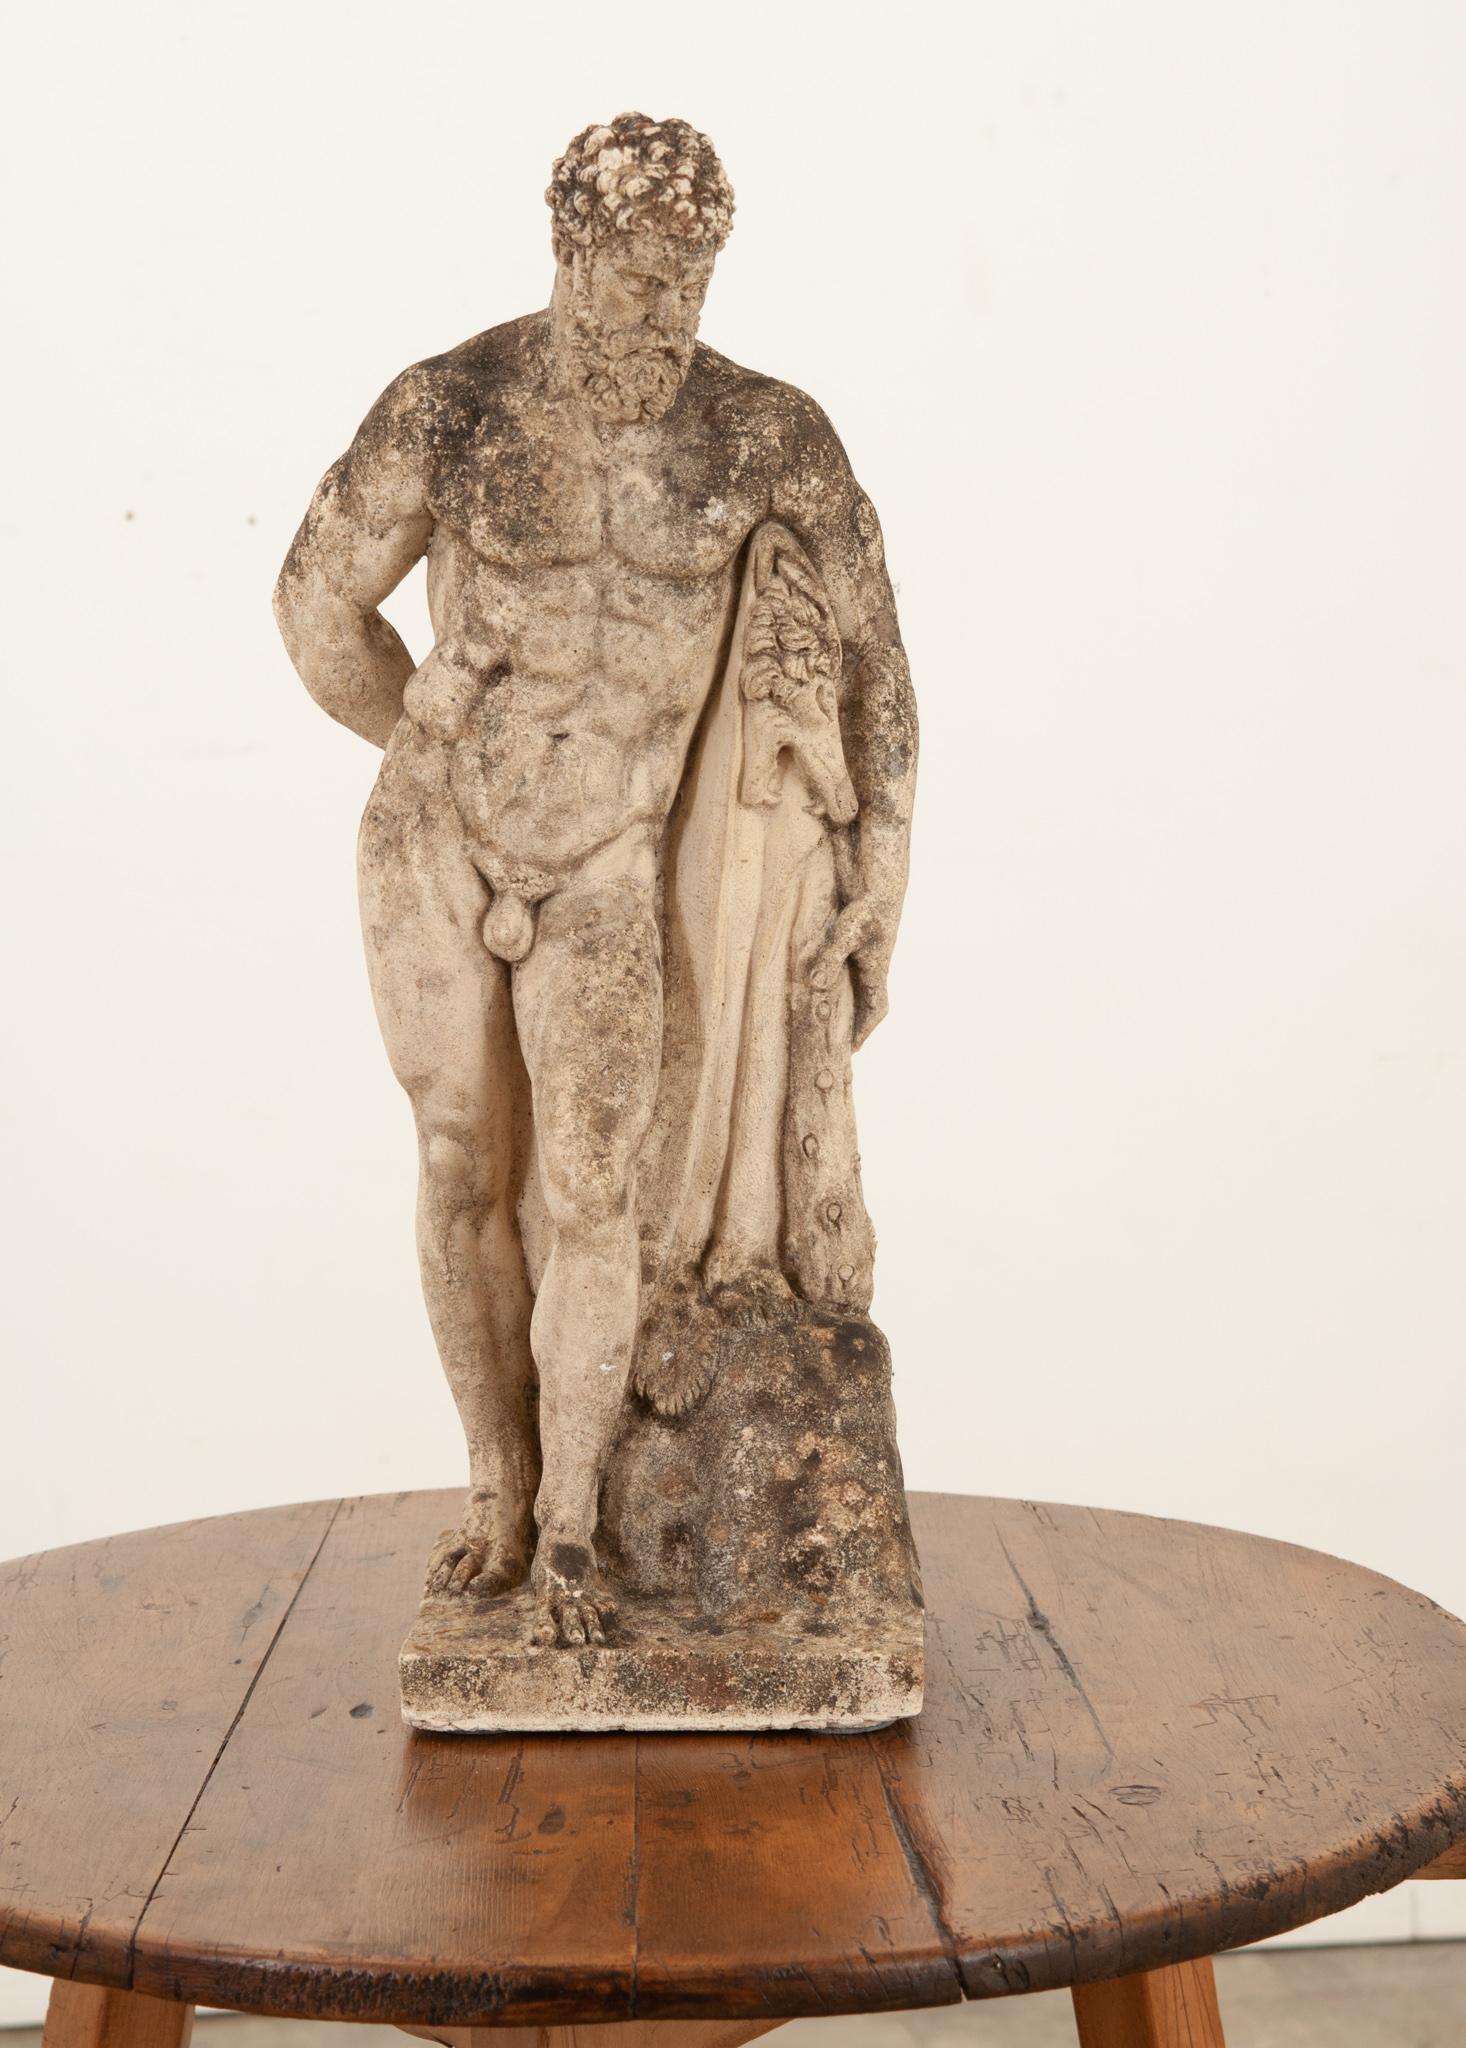 A beautifully patinated 19th century European stone statue depicting the Farnese Hercules, an ancient statue of Hercules made by Glykon in the early third century AD which is one of the most famous sculptures of antiquity. A muscular yet weary